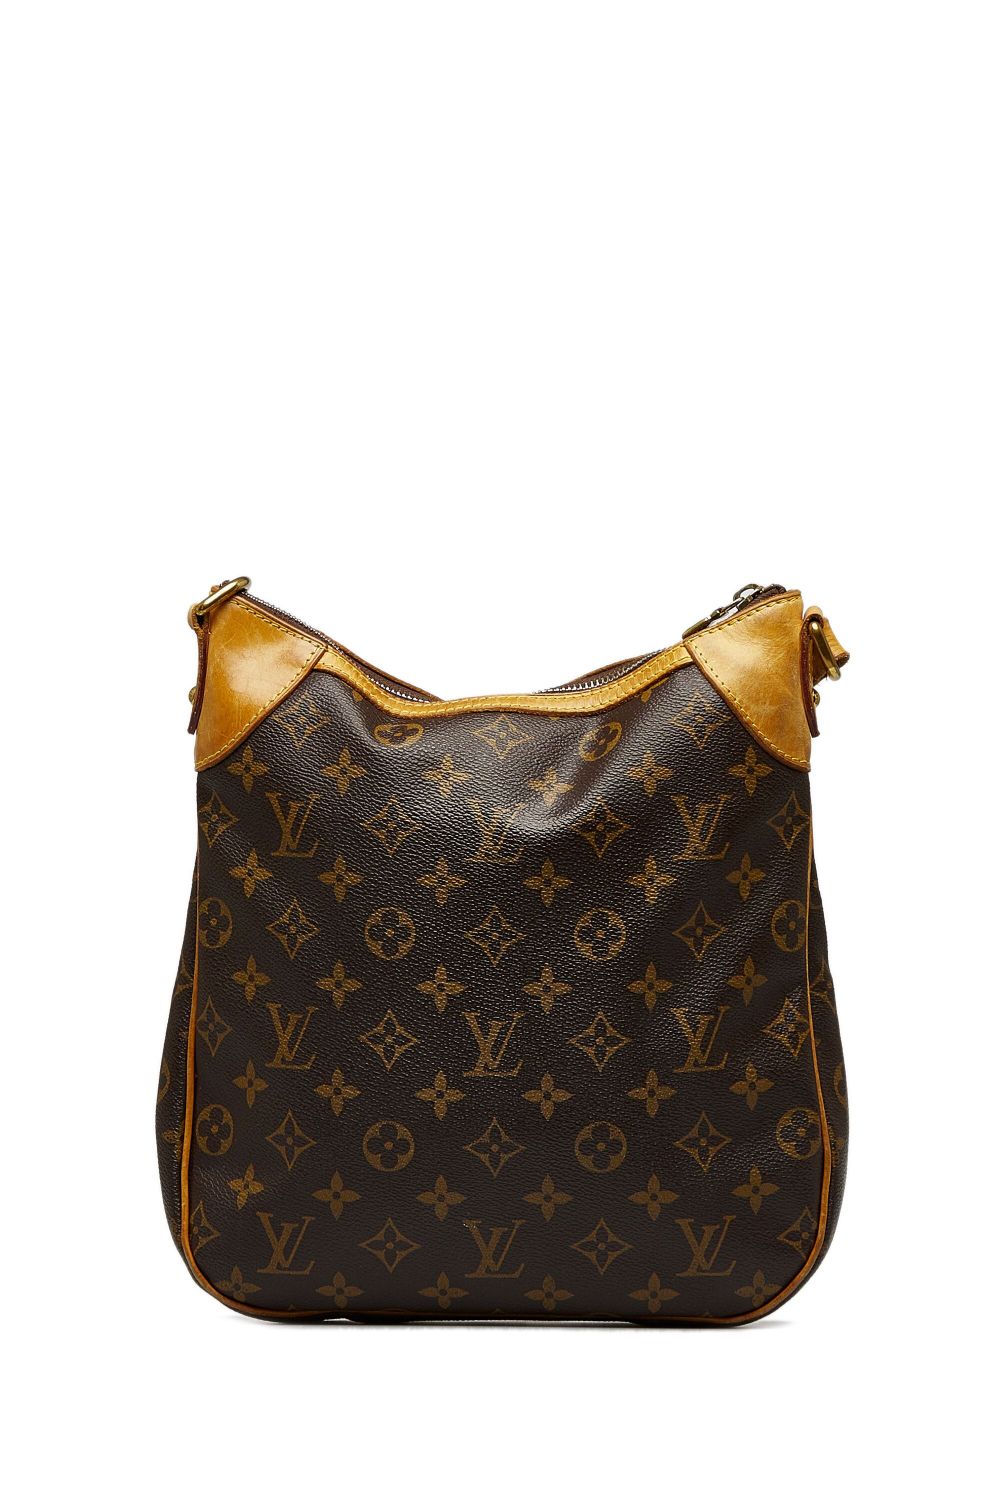 Pre-owned Louis Vuitton Monogram Odeon Pm 斜挎包（2010年典藏款） In Brown